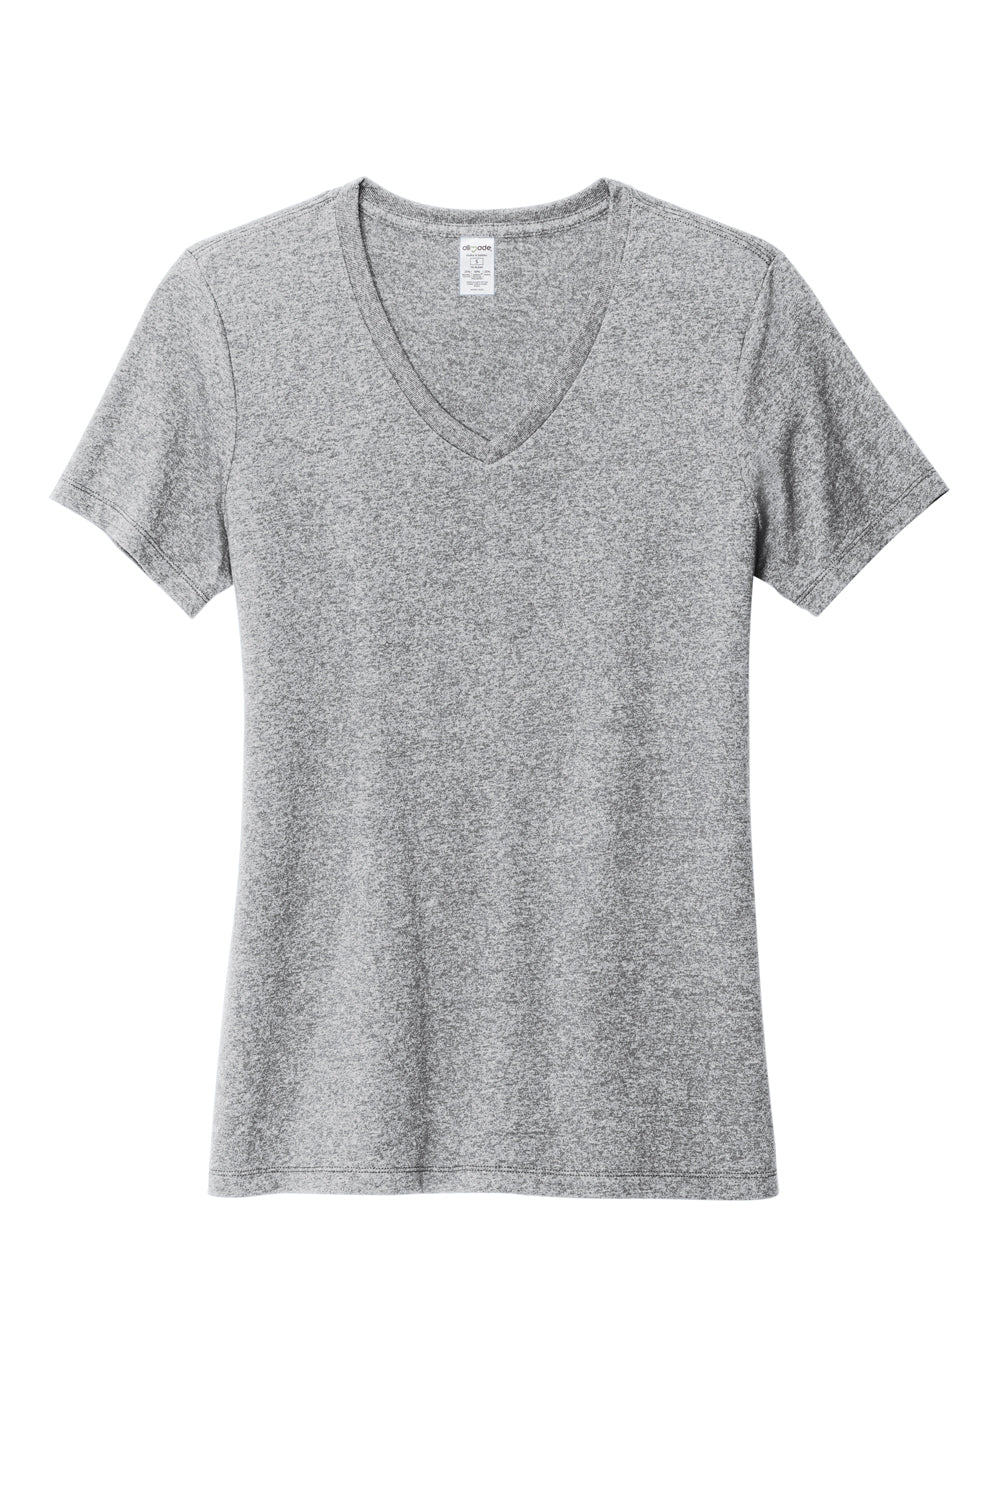 Allmade AL2303 Womens Recycled Short Sleeve V-Neck T-Shirt Heather Remade Grey Flat Front